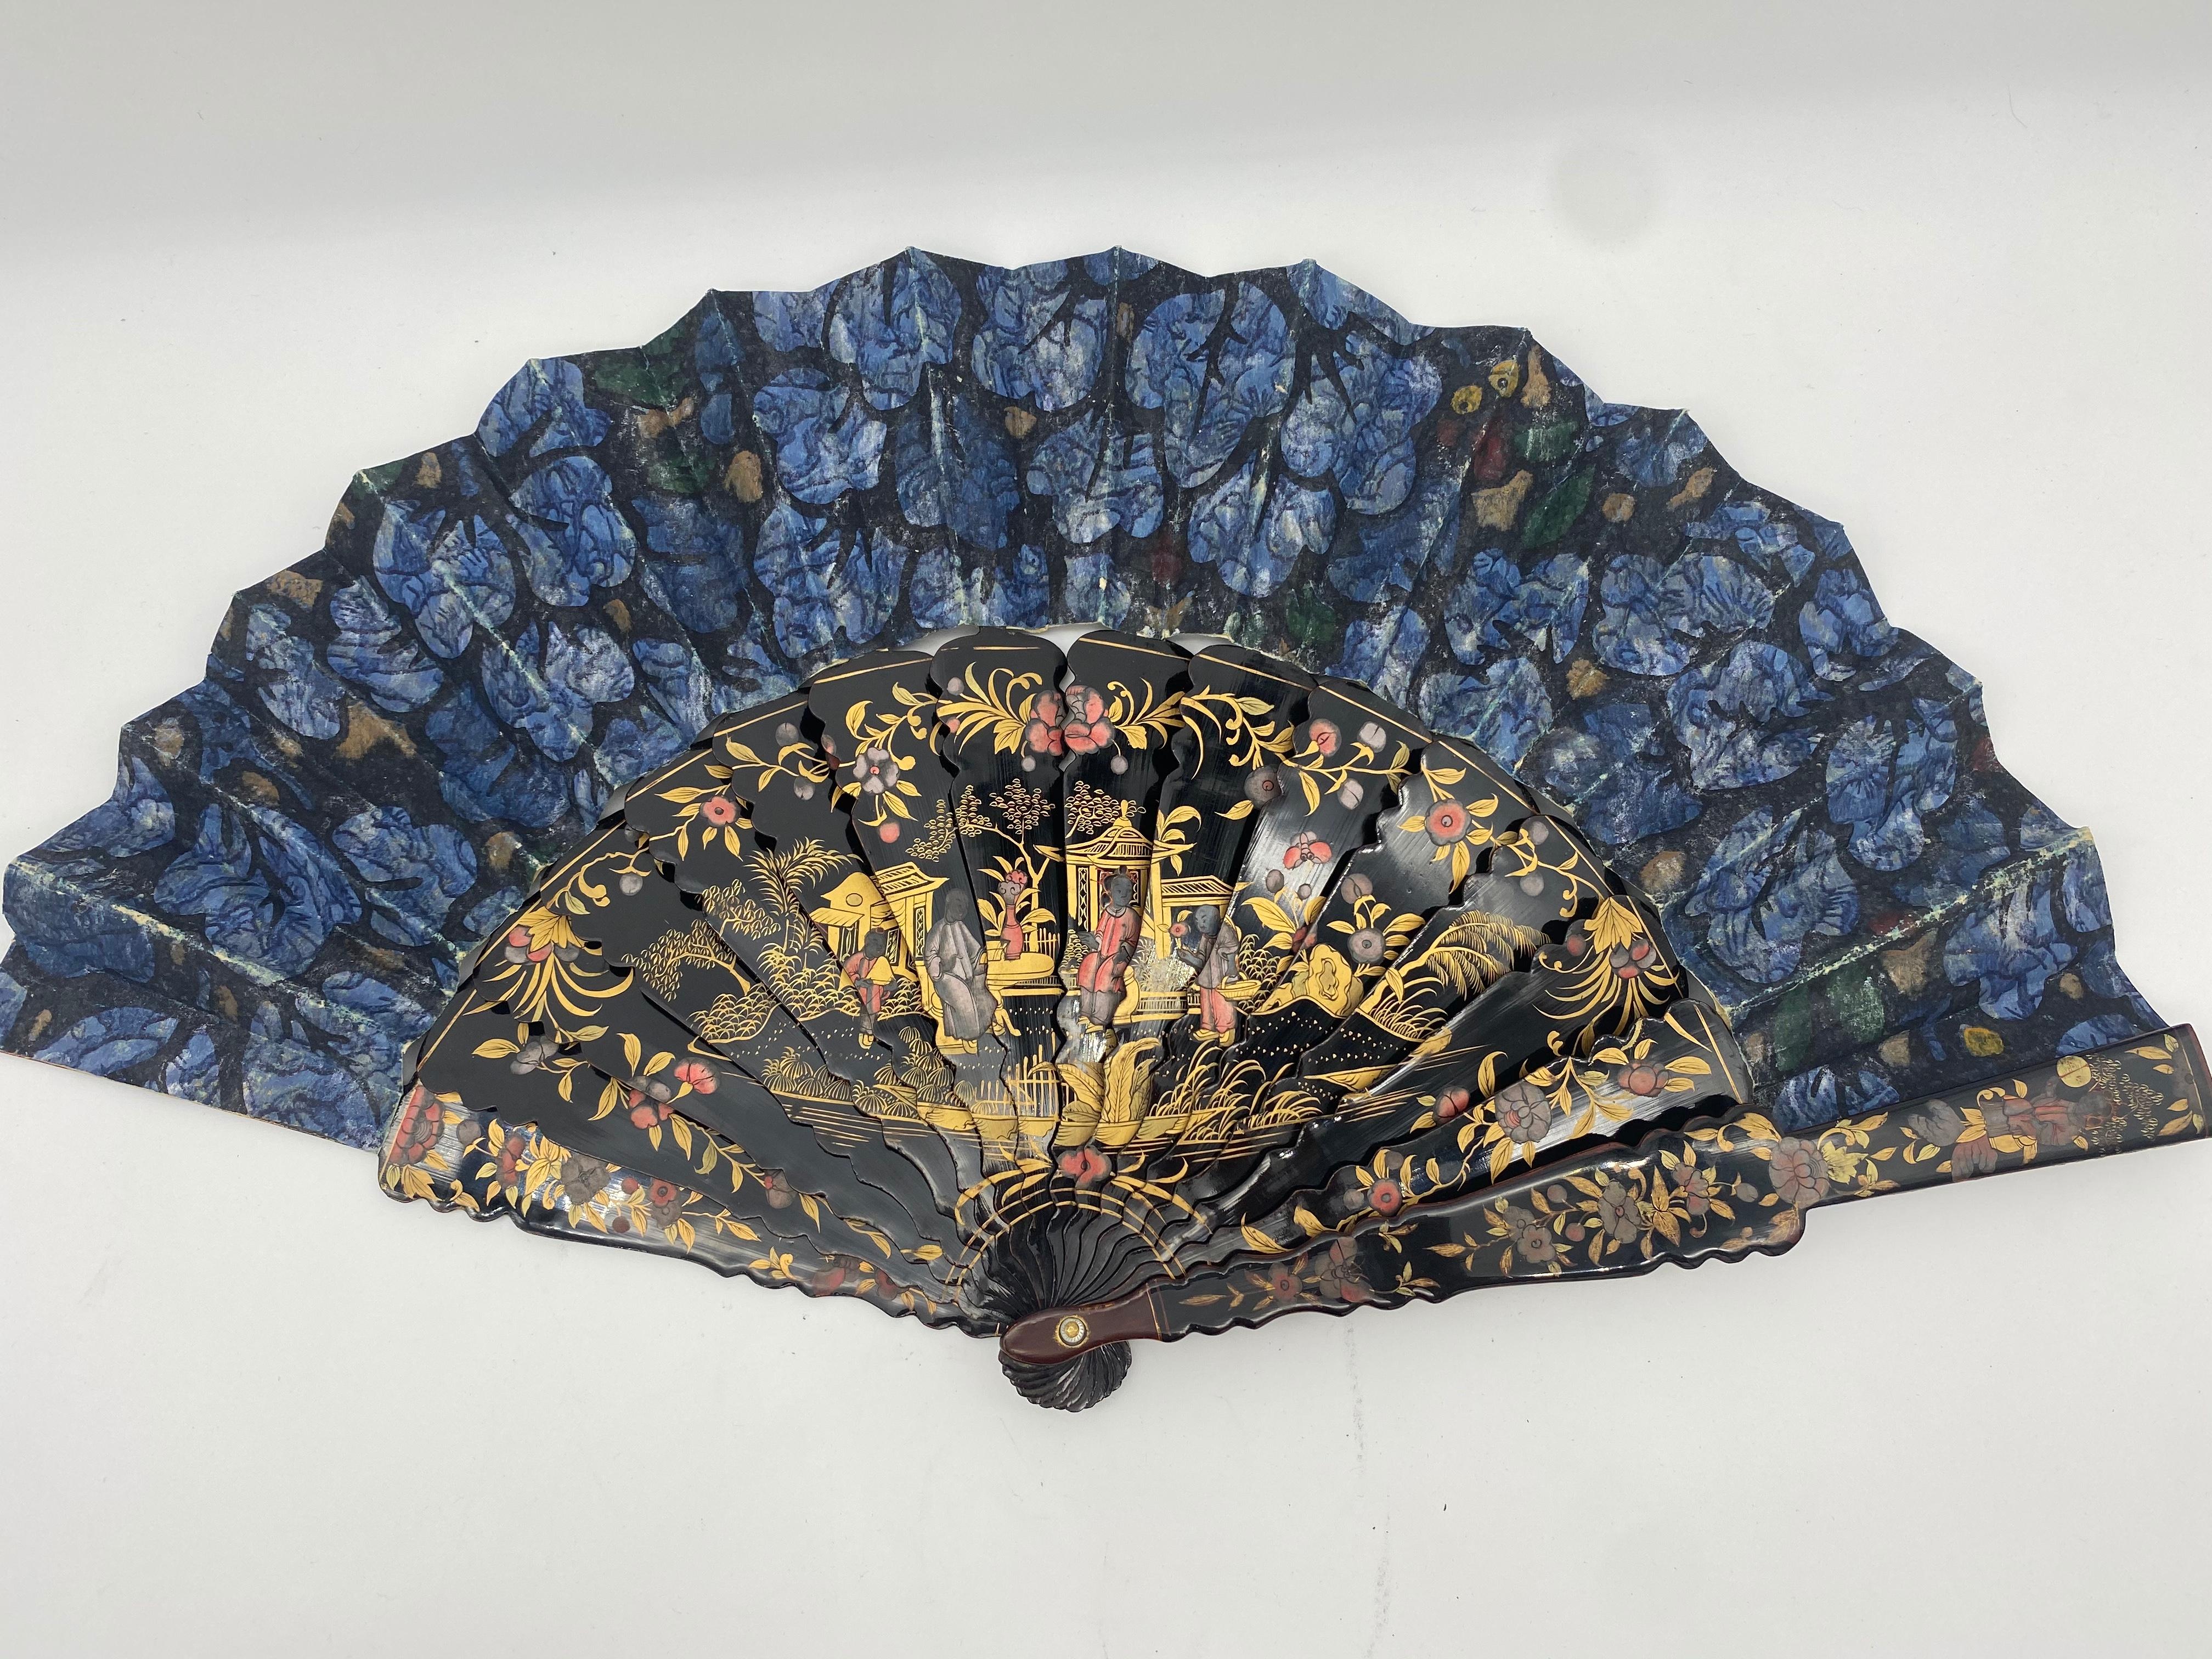 Very large antique 19th century Chinese hand painted lacquer export fan even-tail from the Qing Dynasty.